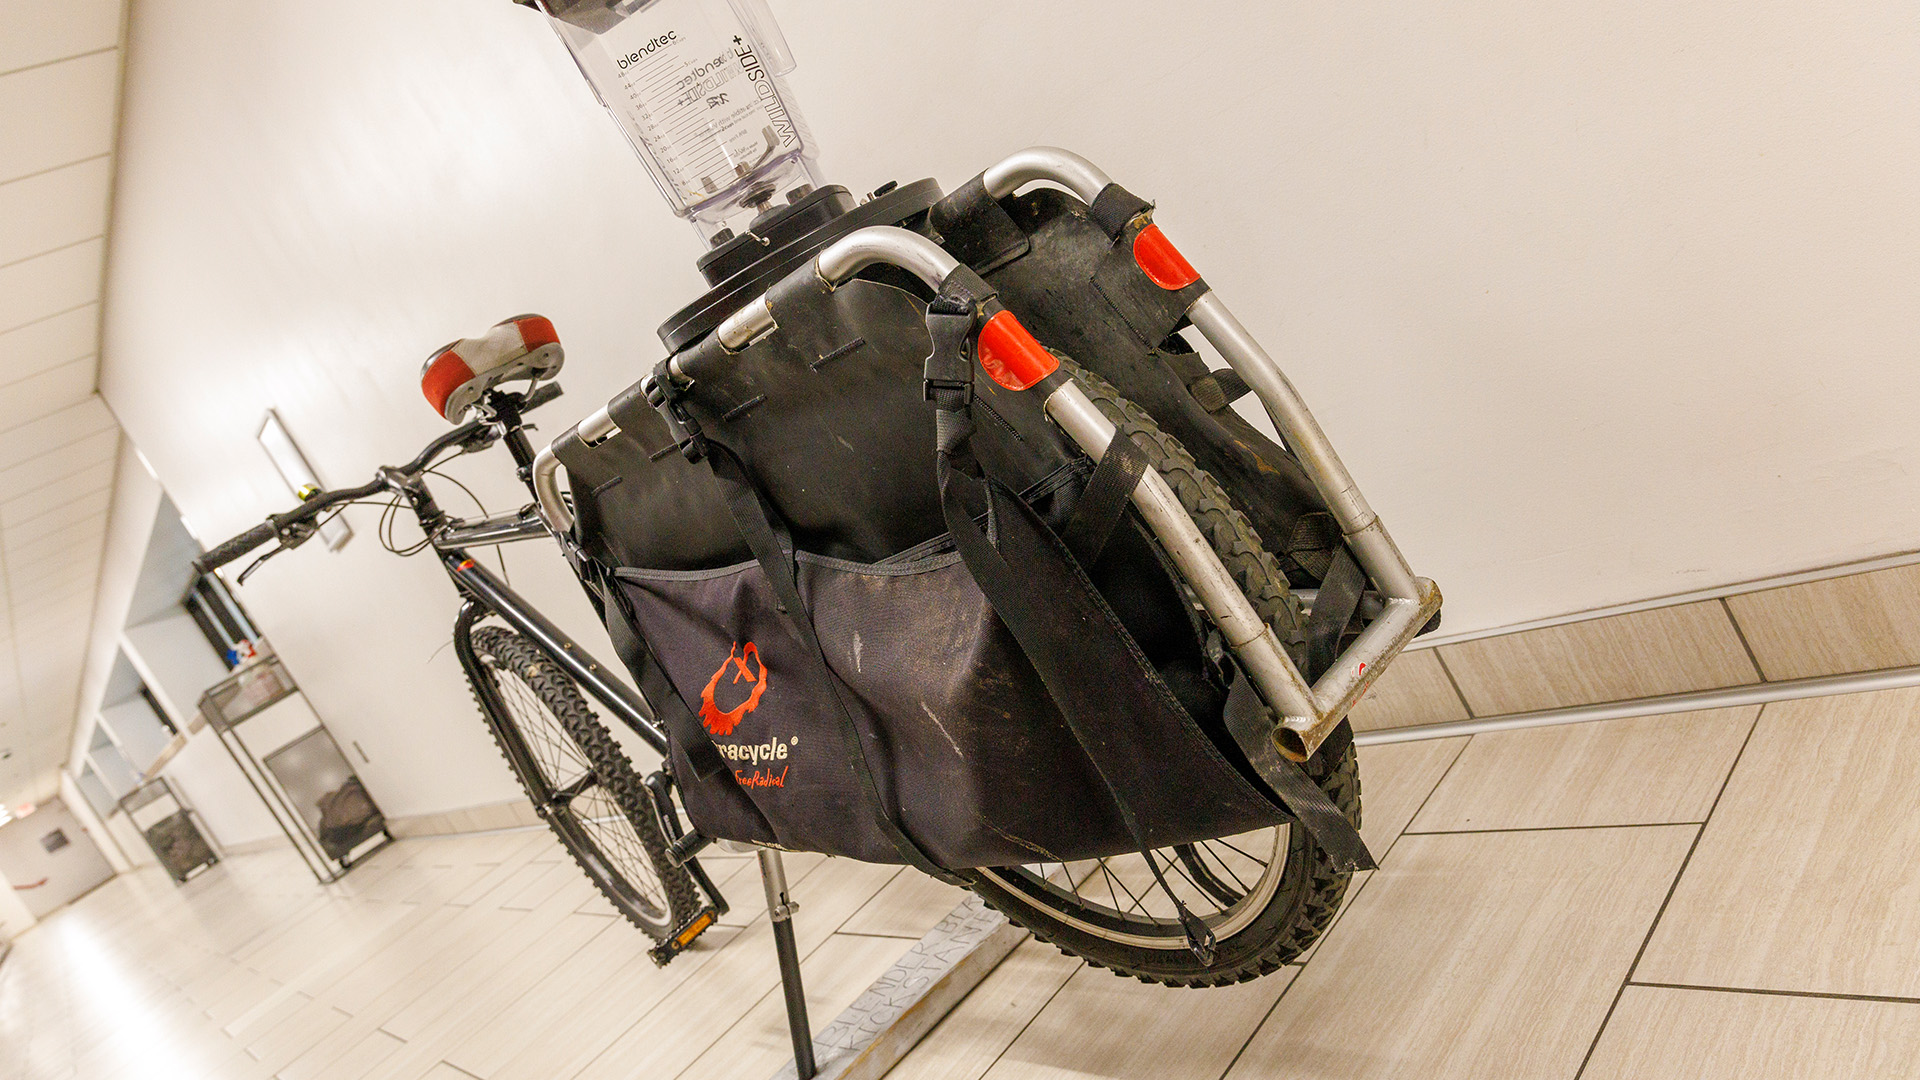 Image of the blender bike used at Campus Recreation